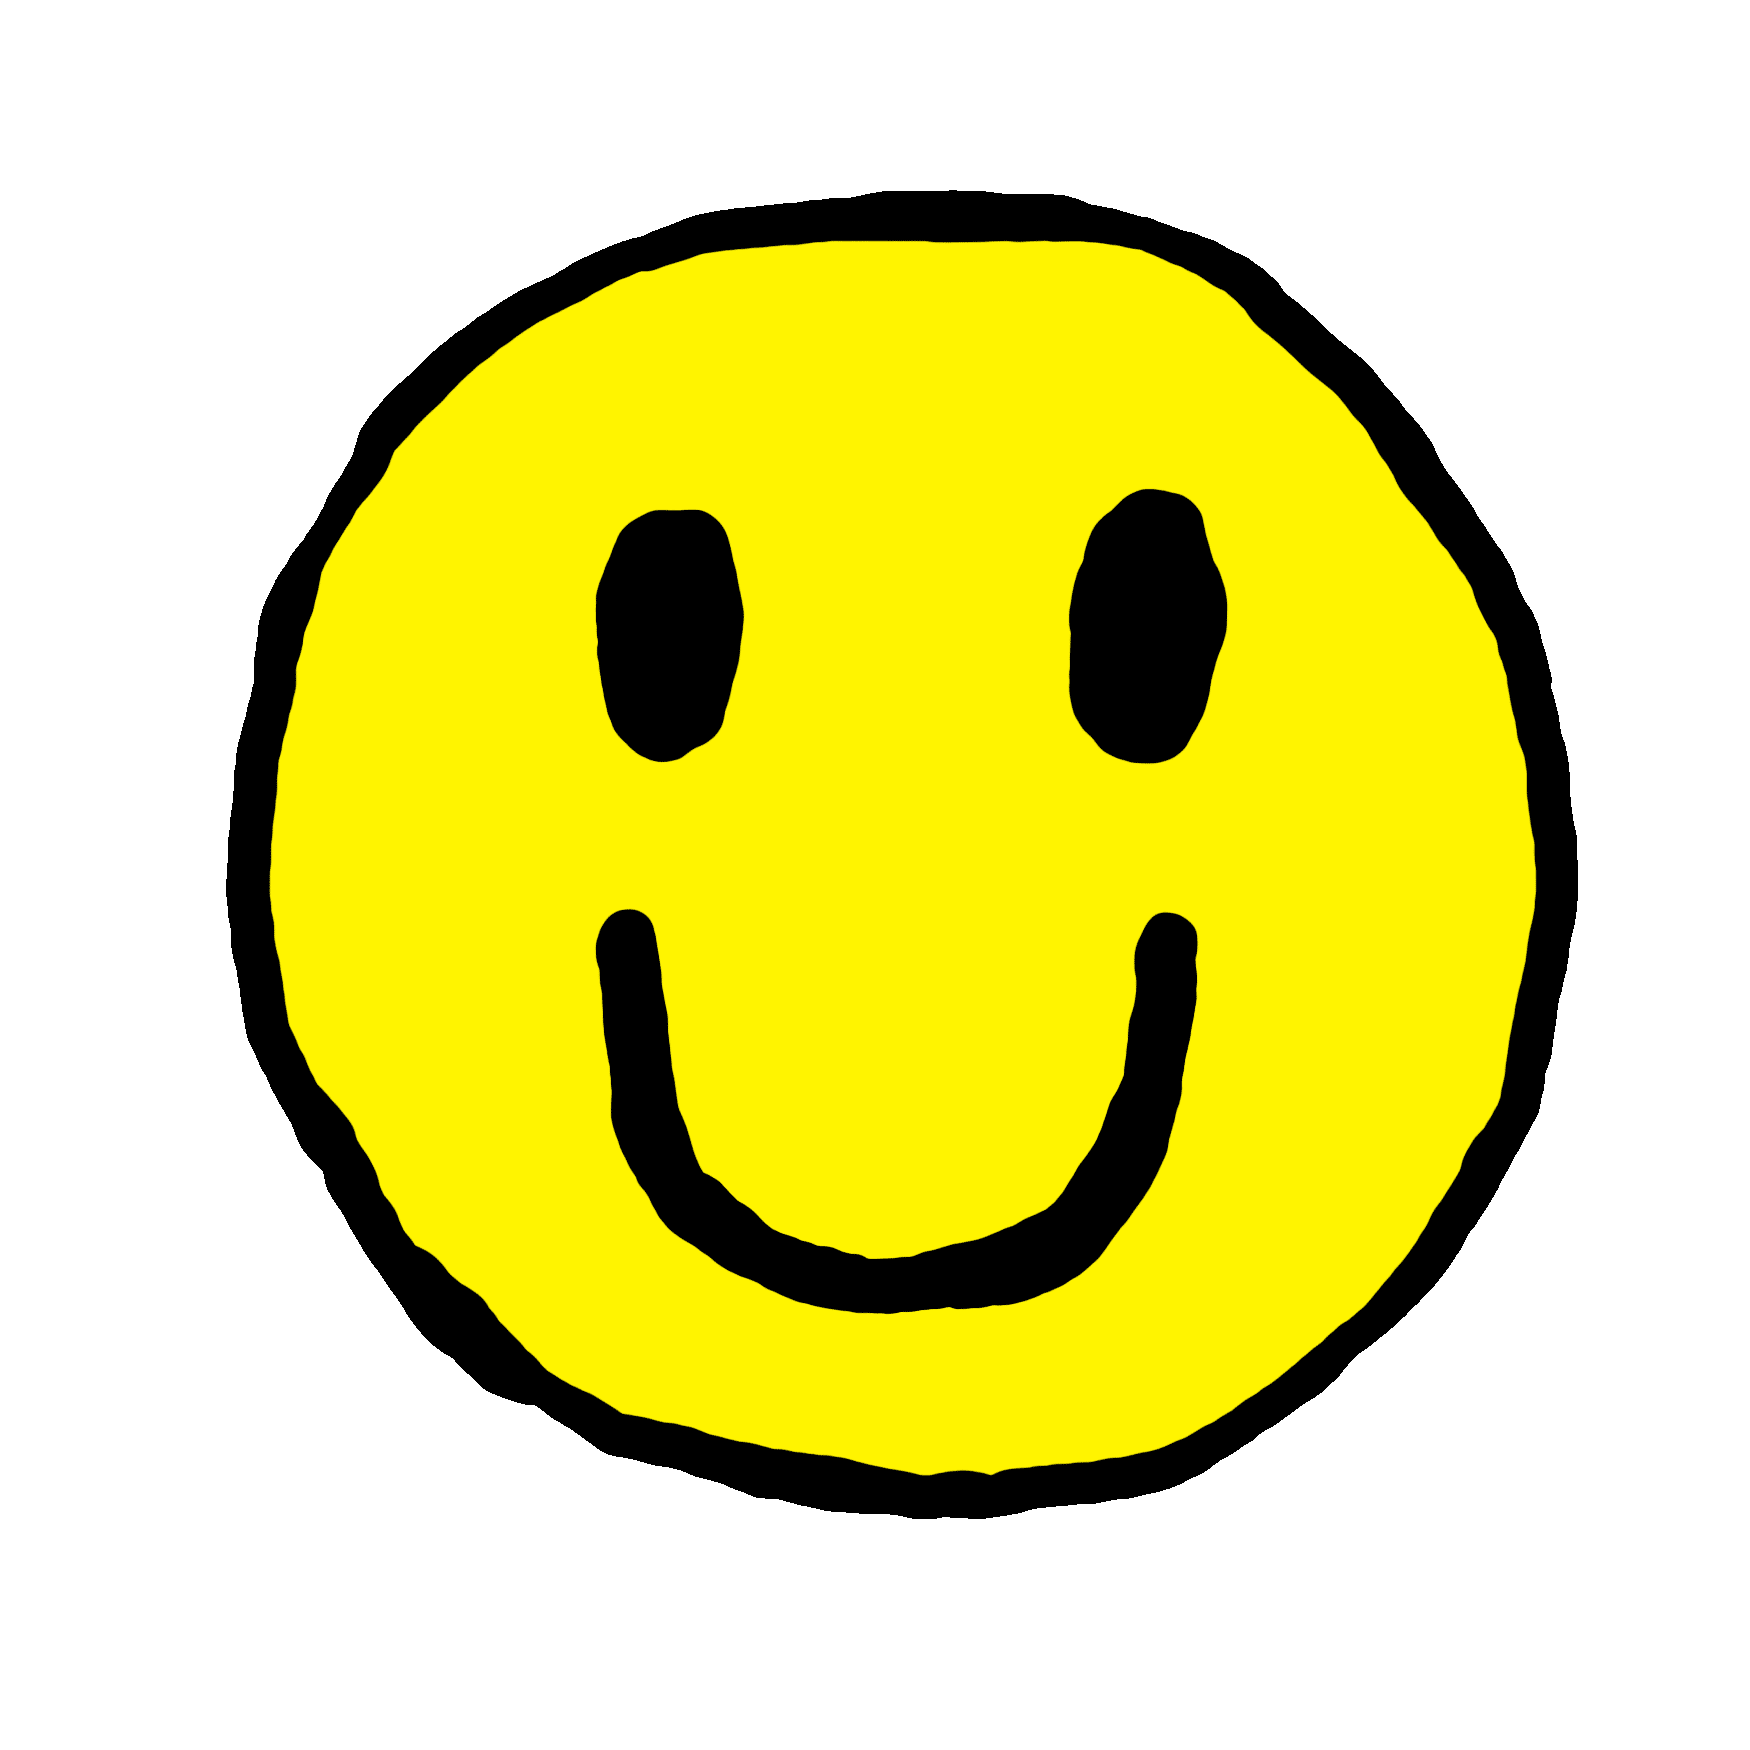 Smiley Face Smile Sticker by PAUL Component Engineering for iOS & Android |  GIPHY